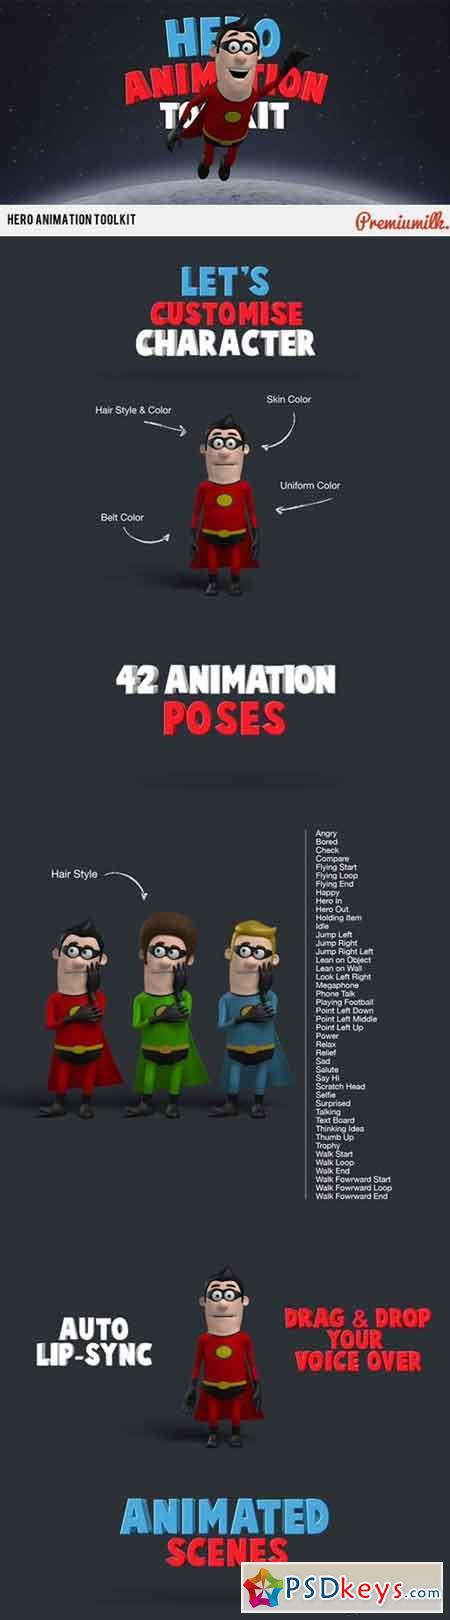 Hero Animation Toolkit 20005694 - After Effects Projects